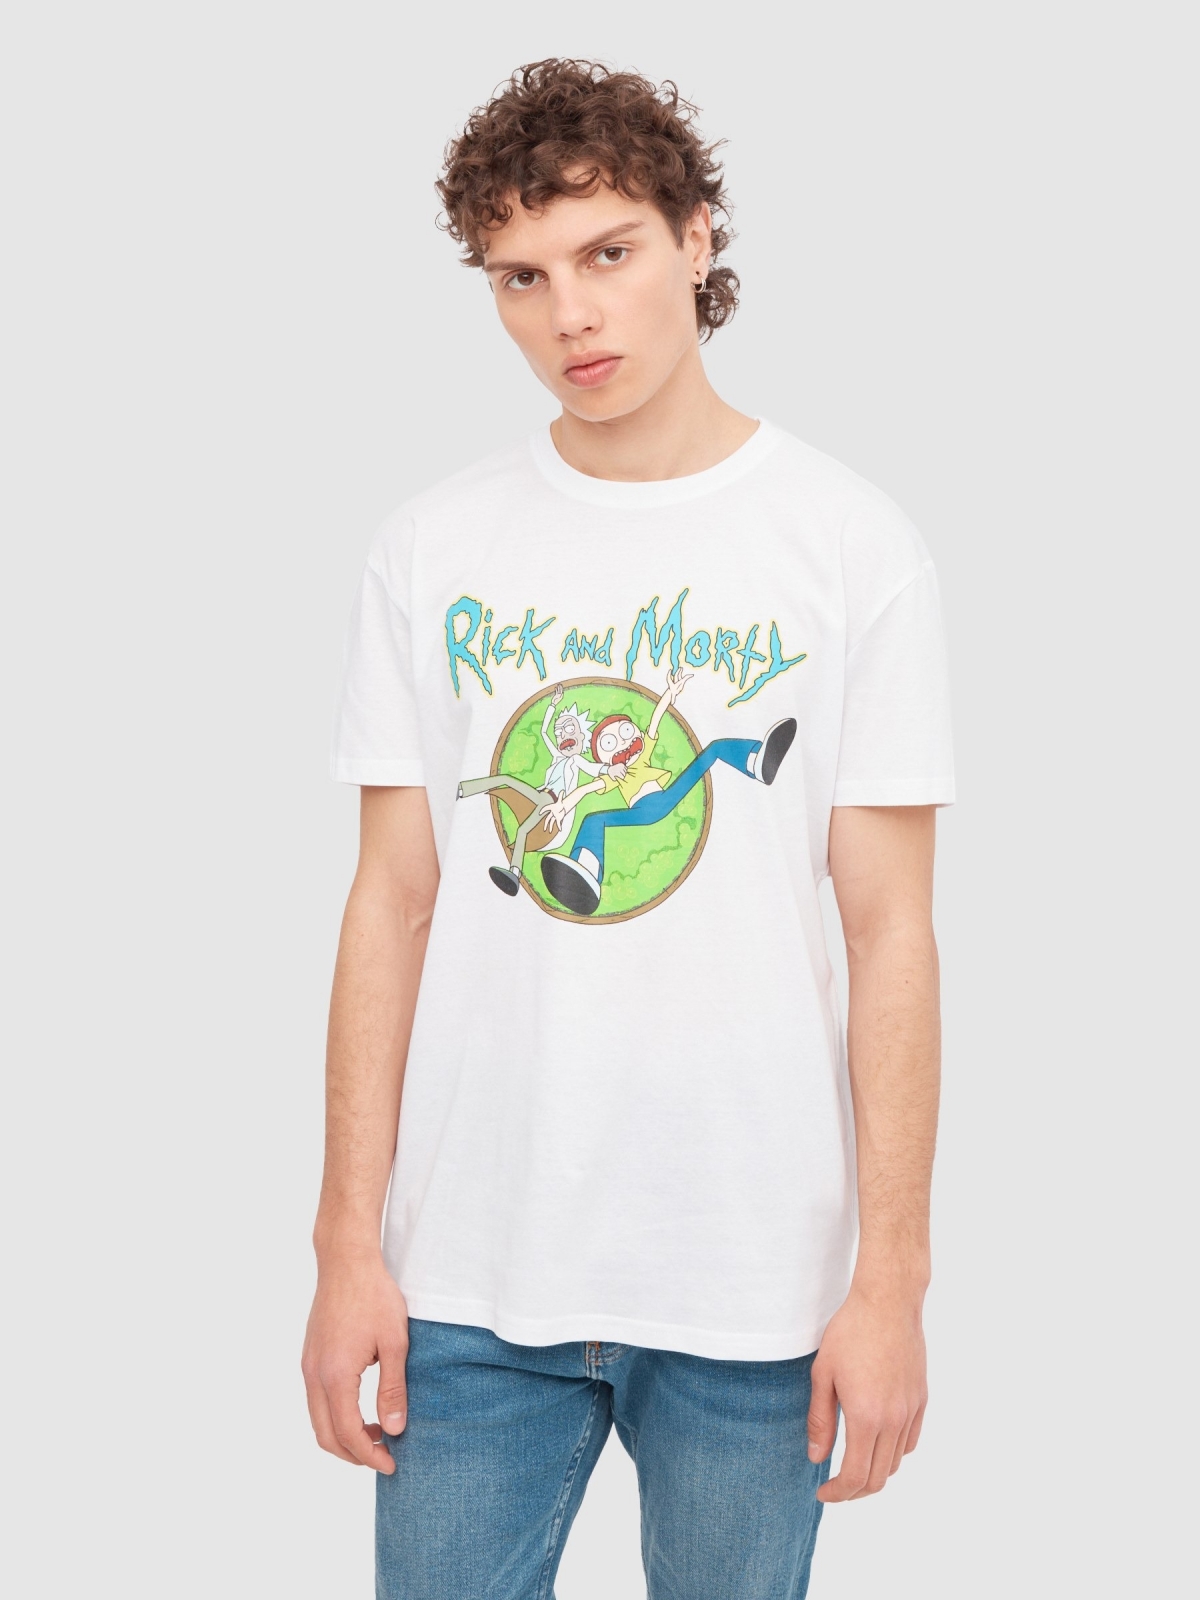 Rick and Morty t-shirt white middle front view